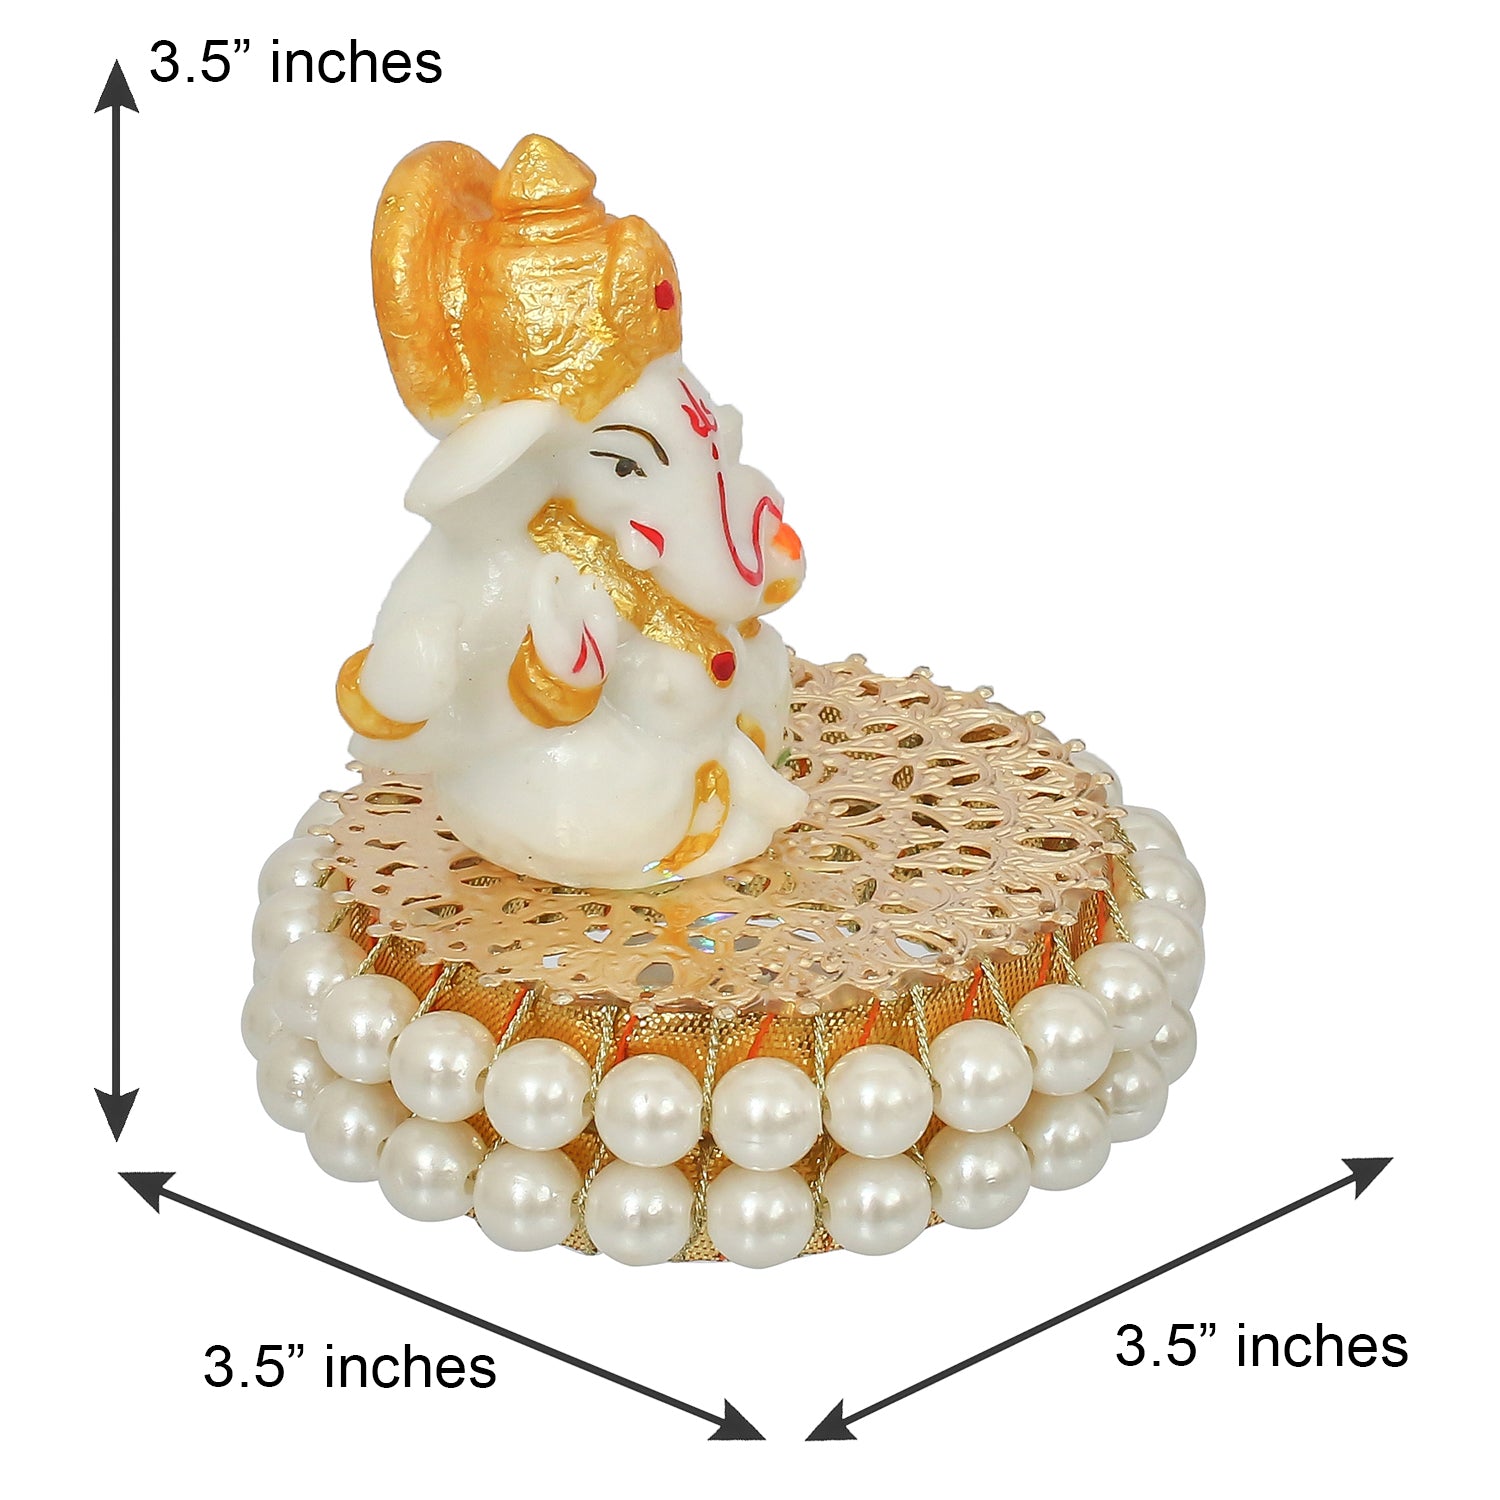 Gold and White Polyresin Lord Ganesha Idol on Decorative Handcrafted Plate for Home and Car Dashboard 5